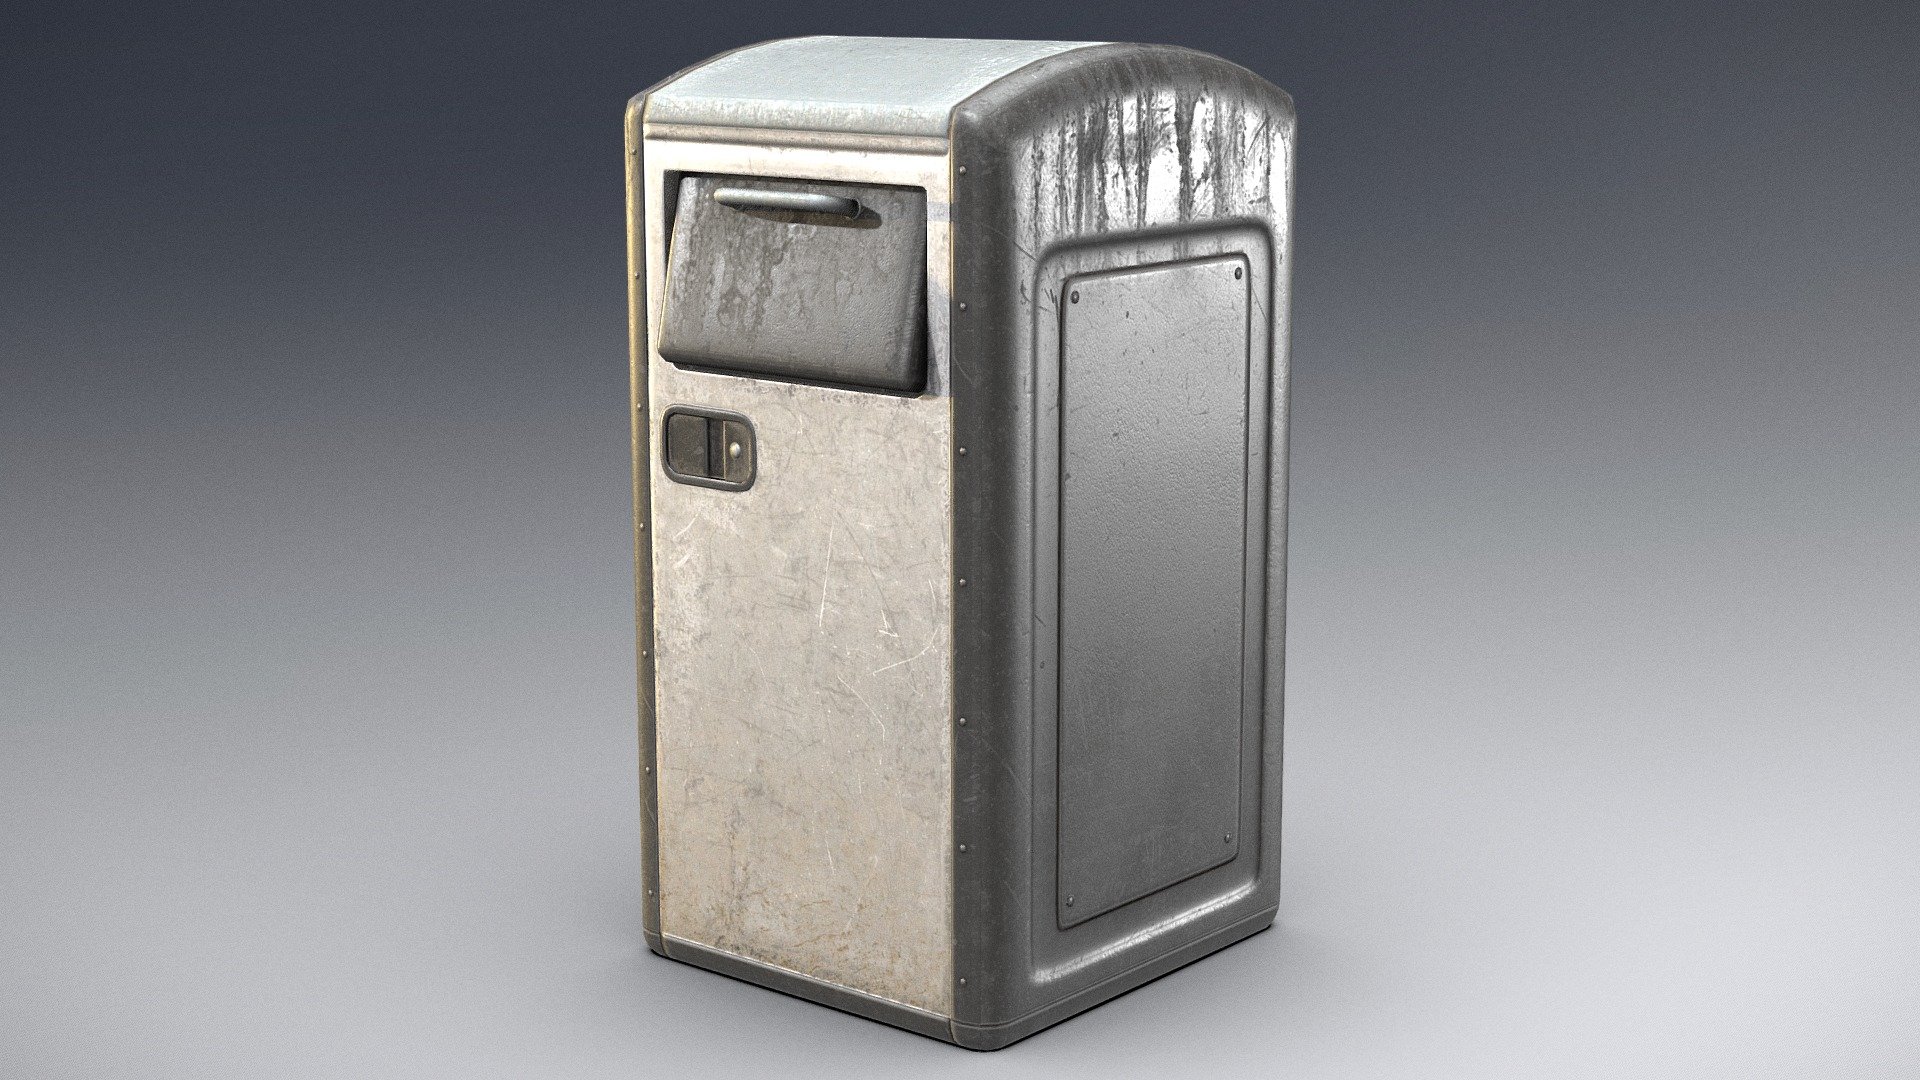 Trash can 3D game ready asset
&hellip;with great attention to detail and rendering.



Designed specifically for game engines and VR and AR - Comes with Unity &amp; Unreal Engine 4 prepared texture sets!
Includes High poly files.


What do you get?

Models:




Trash can high-poly model (.fbx)

Trash can  low-poly models (.obj, .fbx)  757 tris

Unity Standard Shader textures :




Albedo 2048x2048

Normal 2048x2048

Specular 2048x2048

Ambient Oclussion 2048x2048

UE4 textures :




Albedo 2048x2048

Normal 2048x2048

RMA (channel packed texture) 2048x2048



Feel free to contact me via PM. Happy shopping, .MG


VR / AR / Low-poly / Game ready / TRASH CAN 3D MODEL - Trash can  - PBR - Game-ready model - Buy Royalty Free 3D model by miloszgierczak 3d model